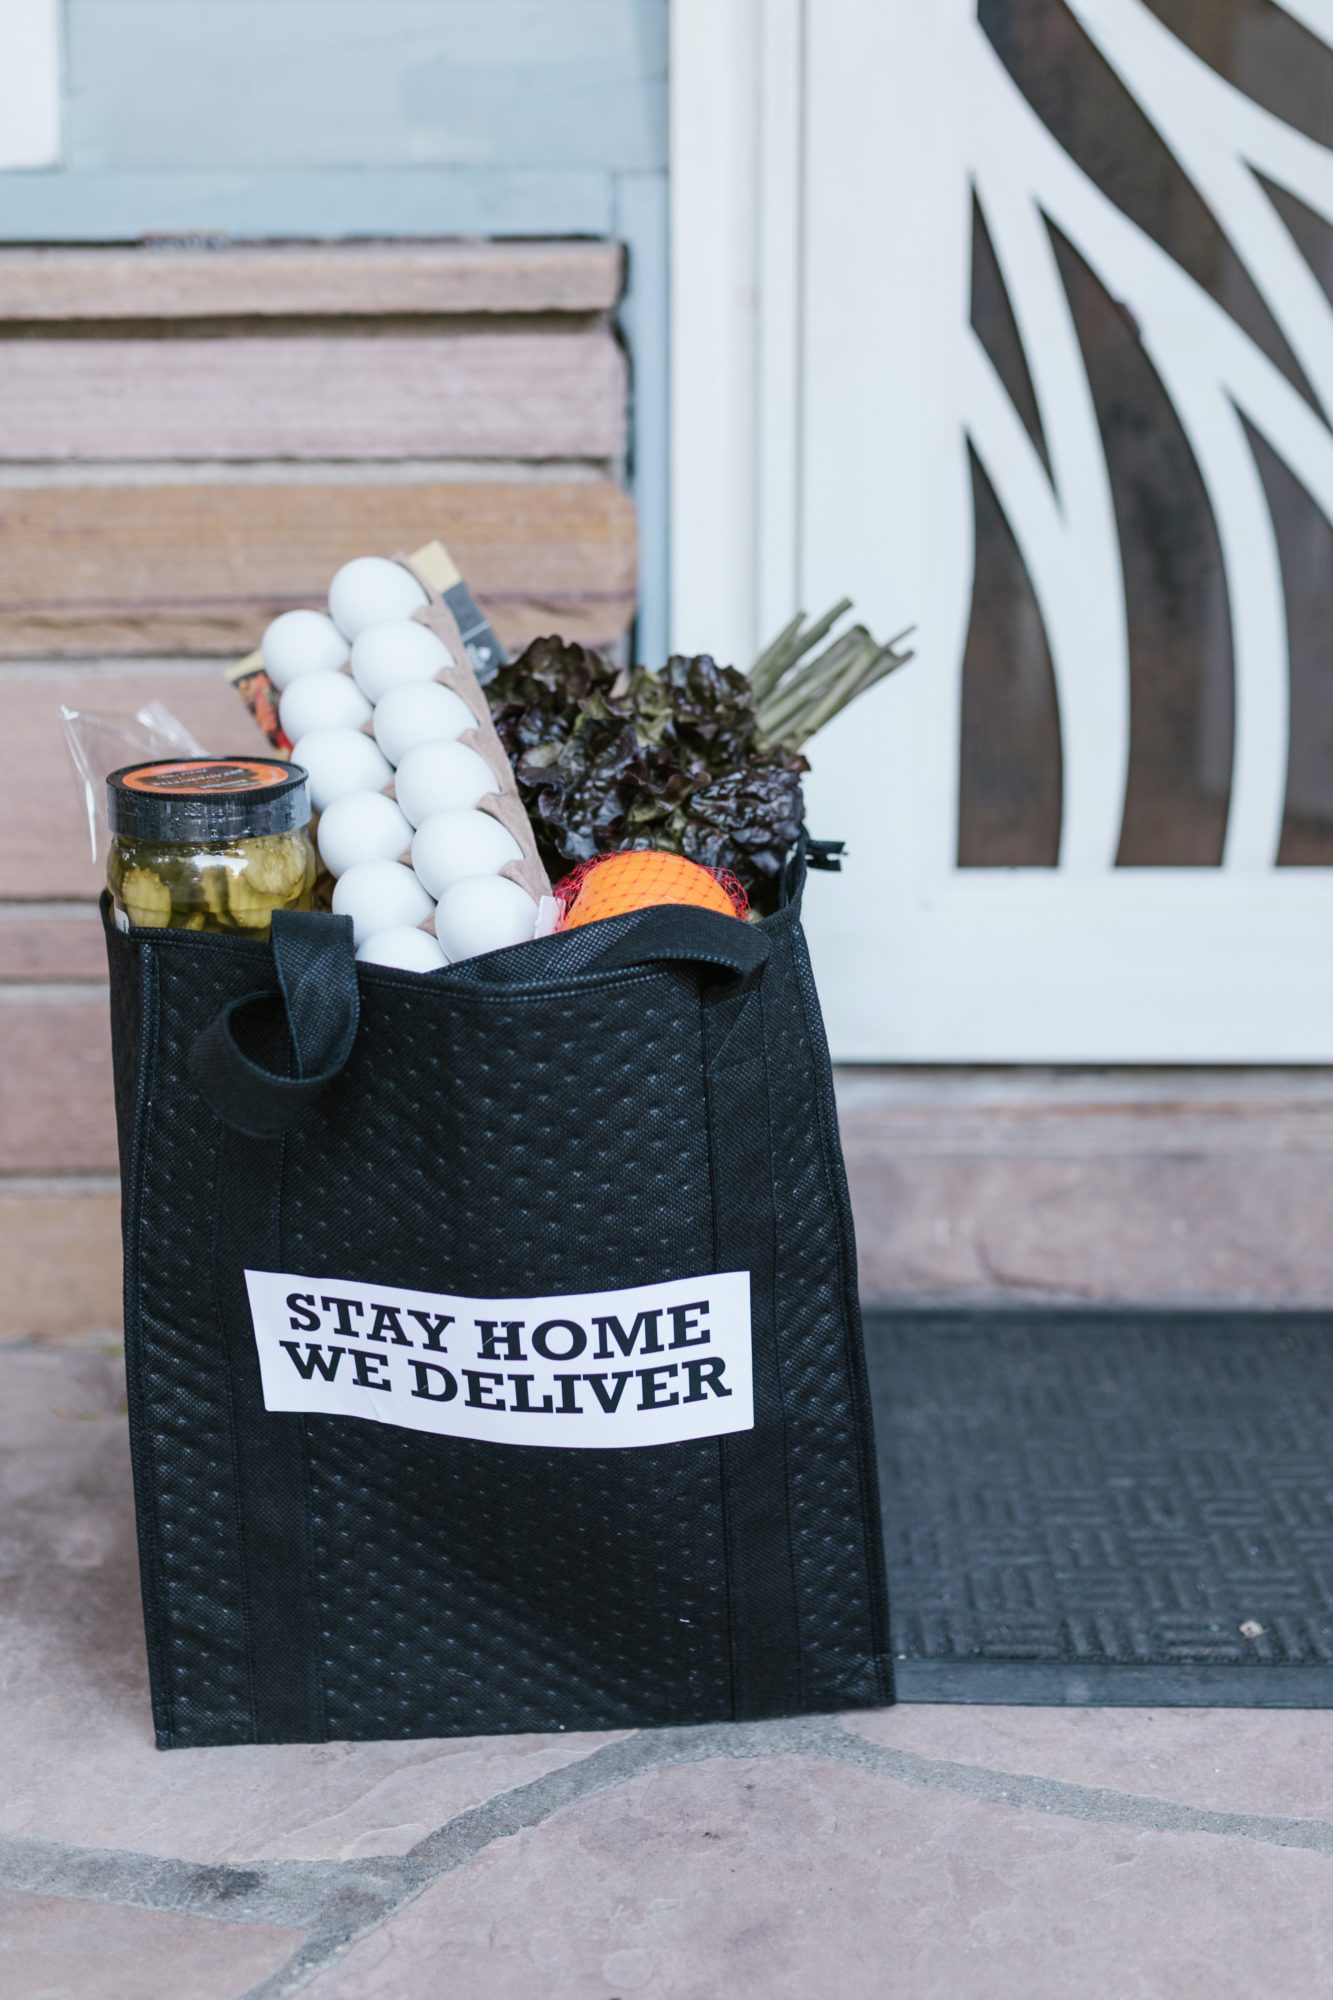 Food Delivery Services Add Grocery Ready-to-Eat Selections, The MDC Group